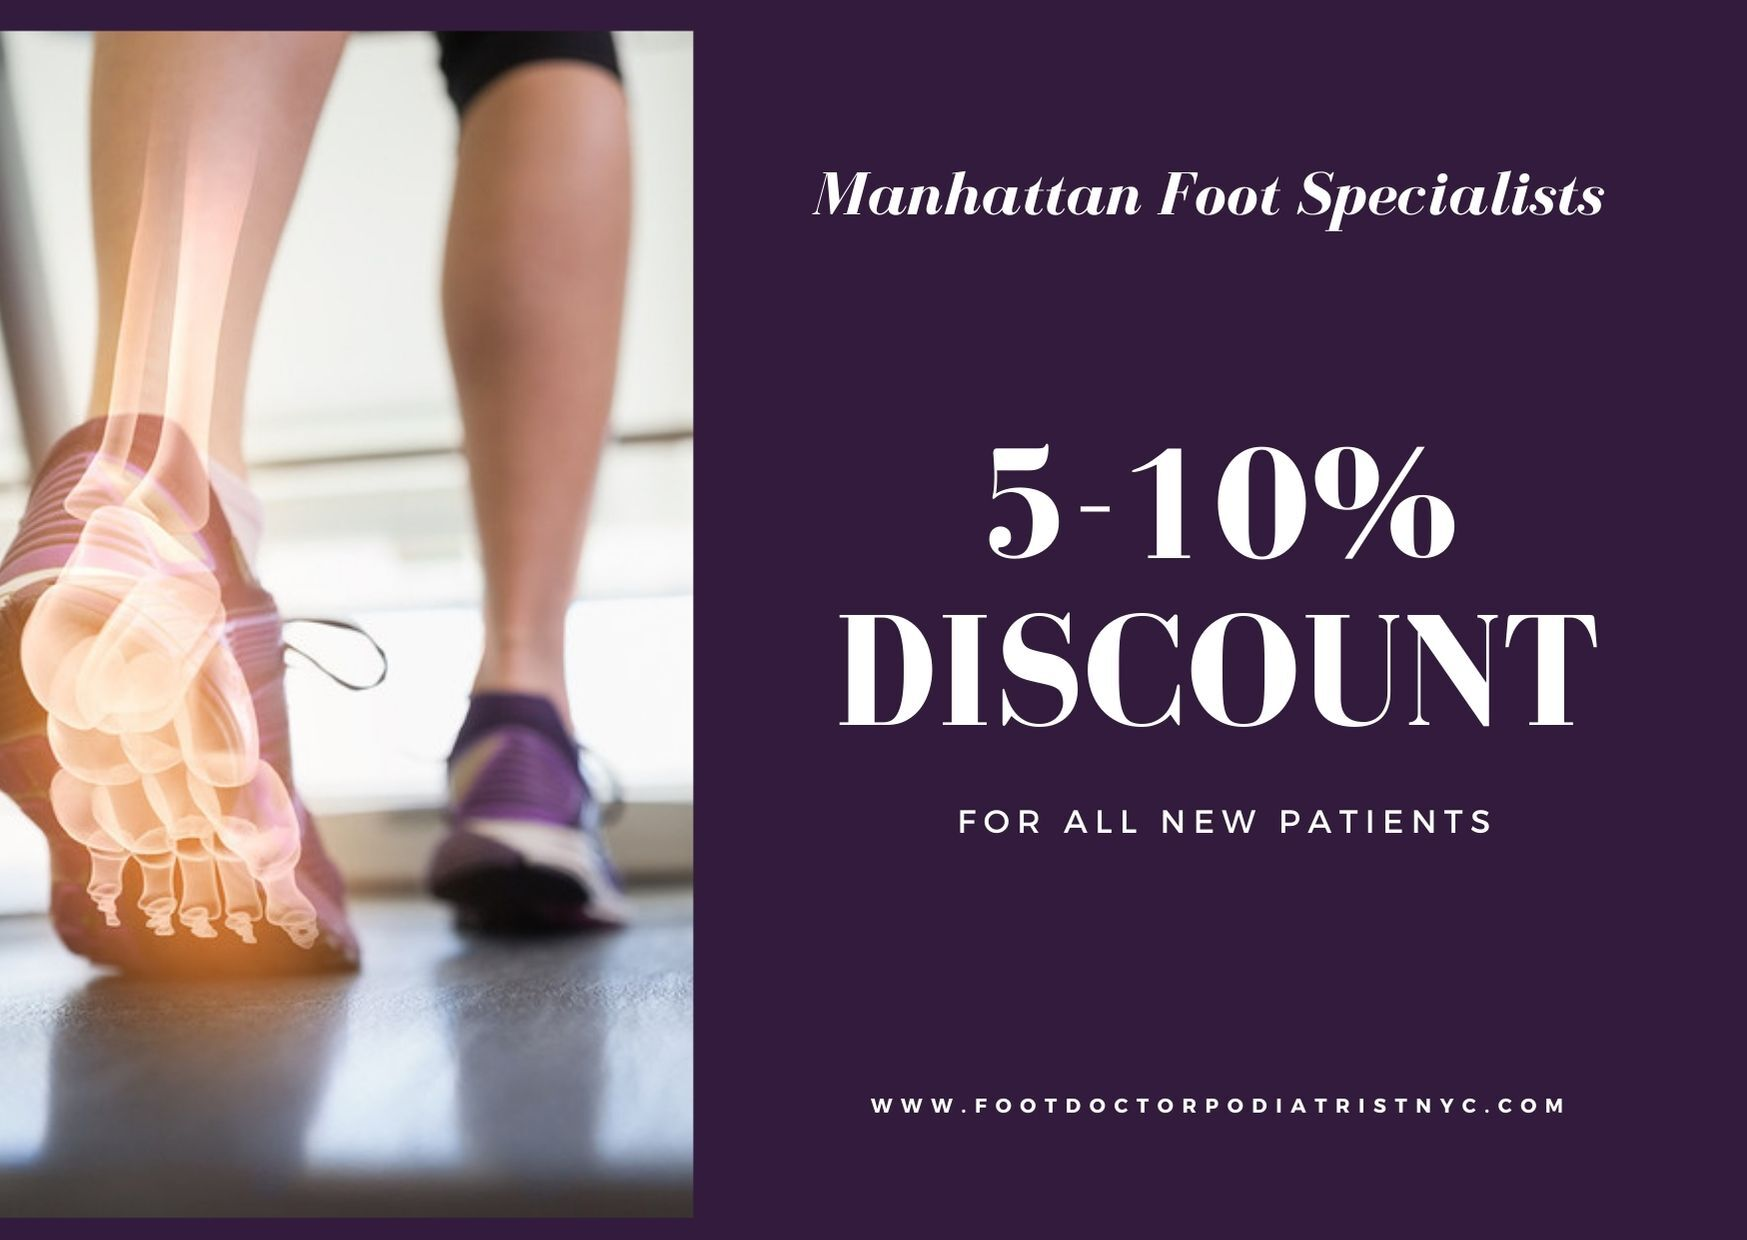 Manhattan Foot Specialists Upper East Side offers a discount'